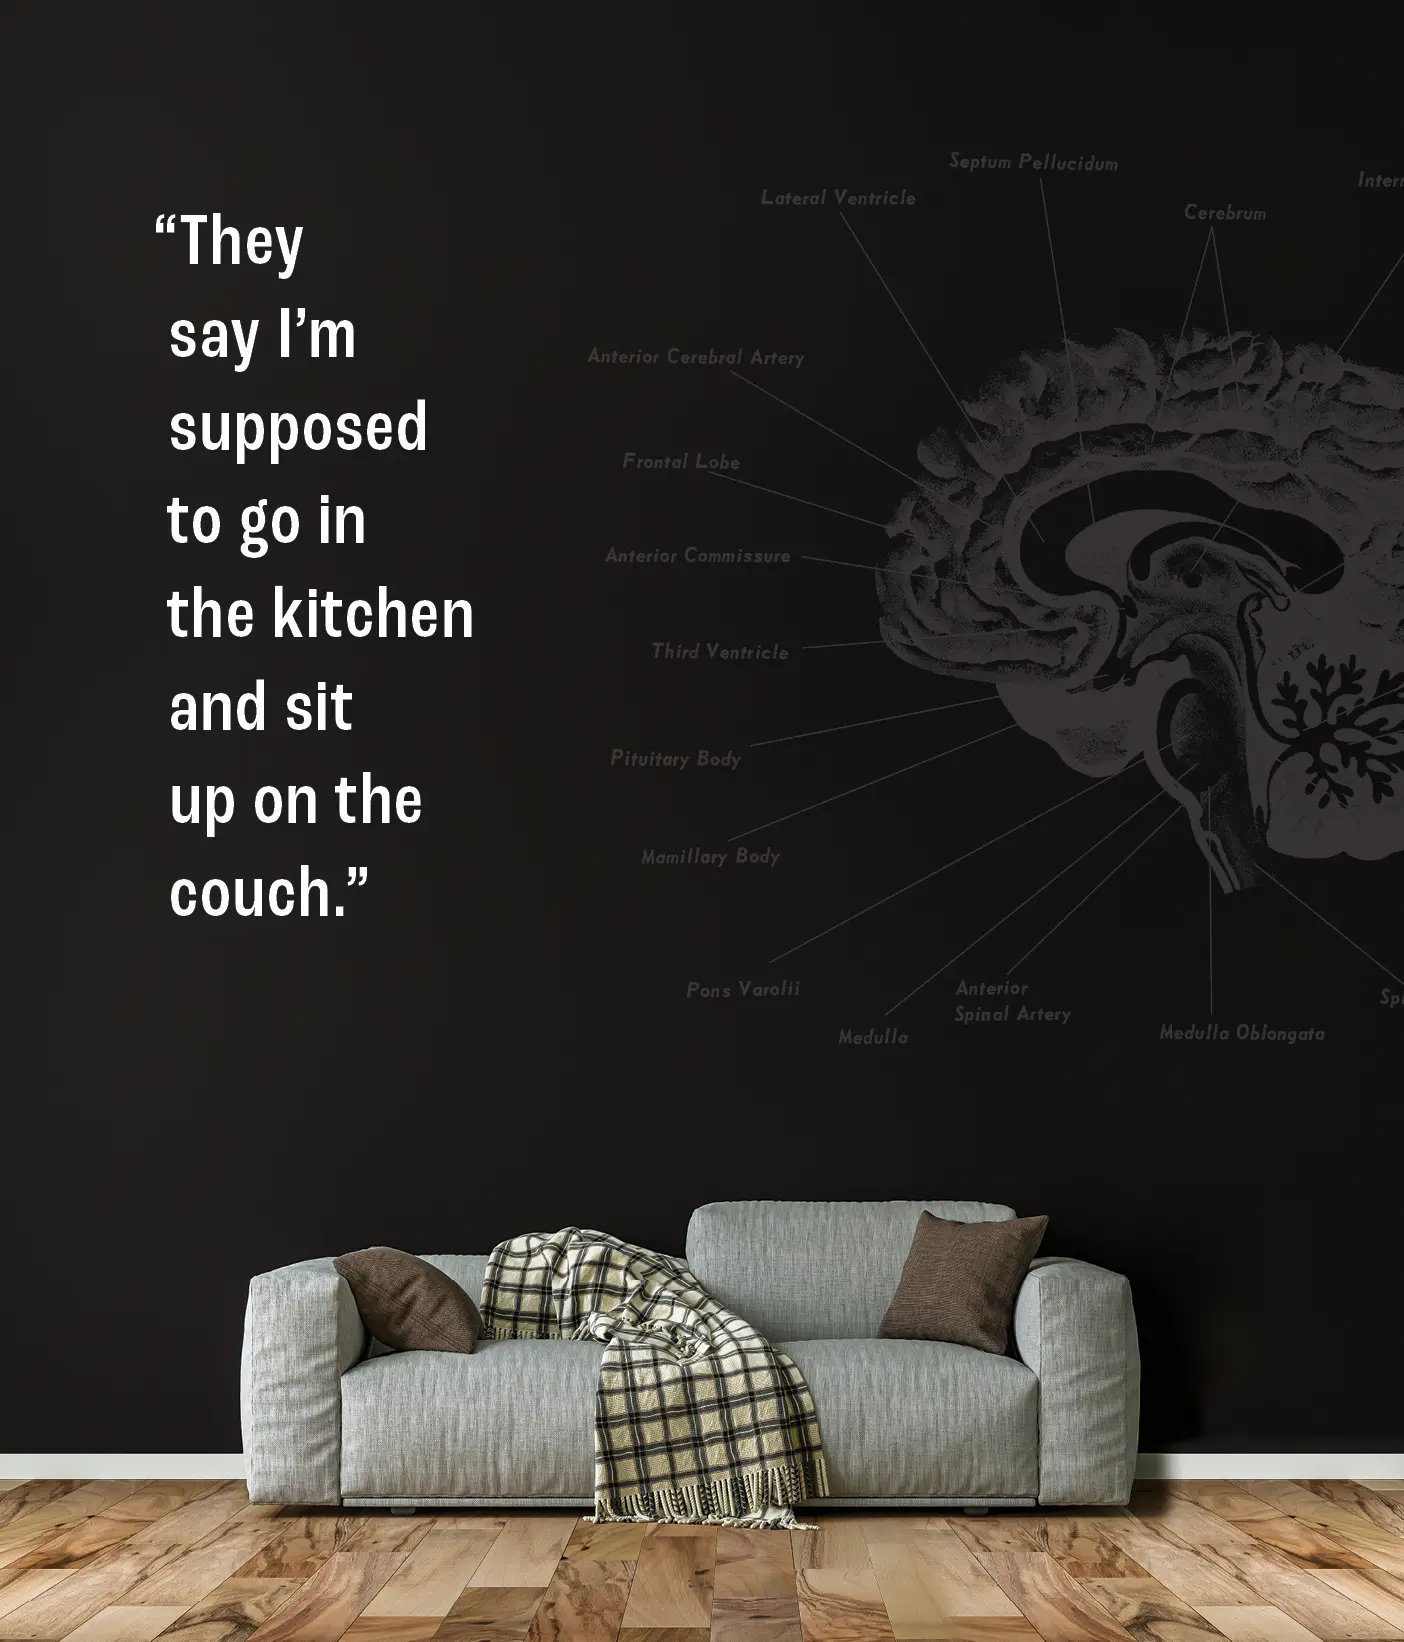 An image of a couch with a brain diagram overlaid. A quote across the top reads, "They say I'm supposed to go in the kitchen and sit up on the couch."